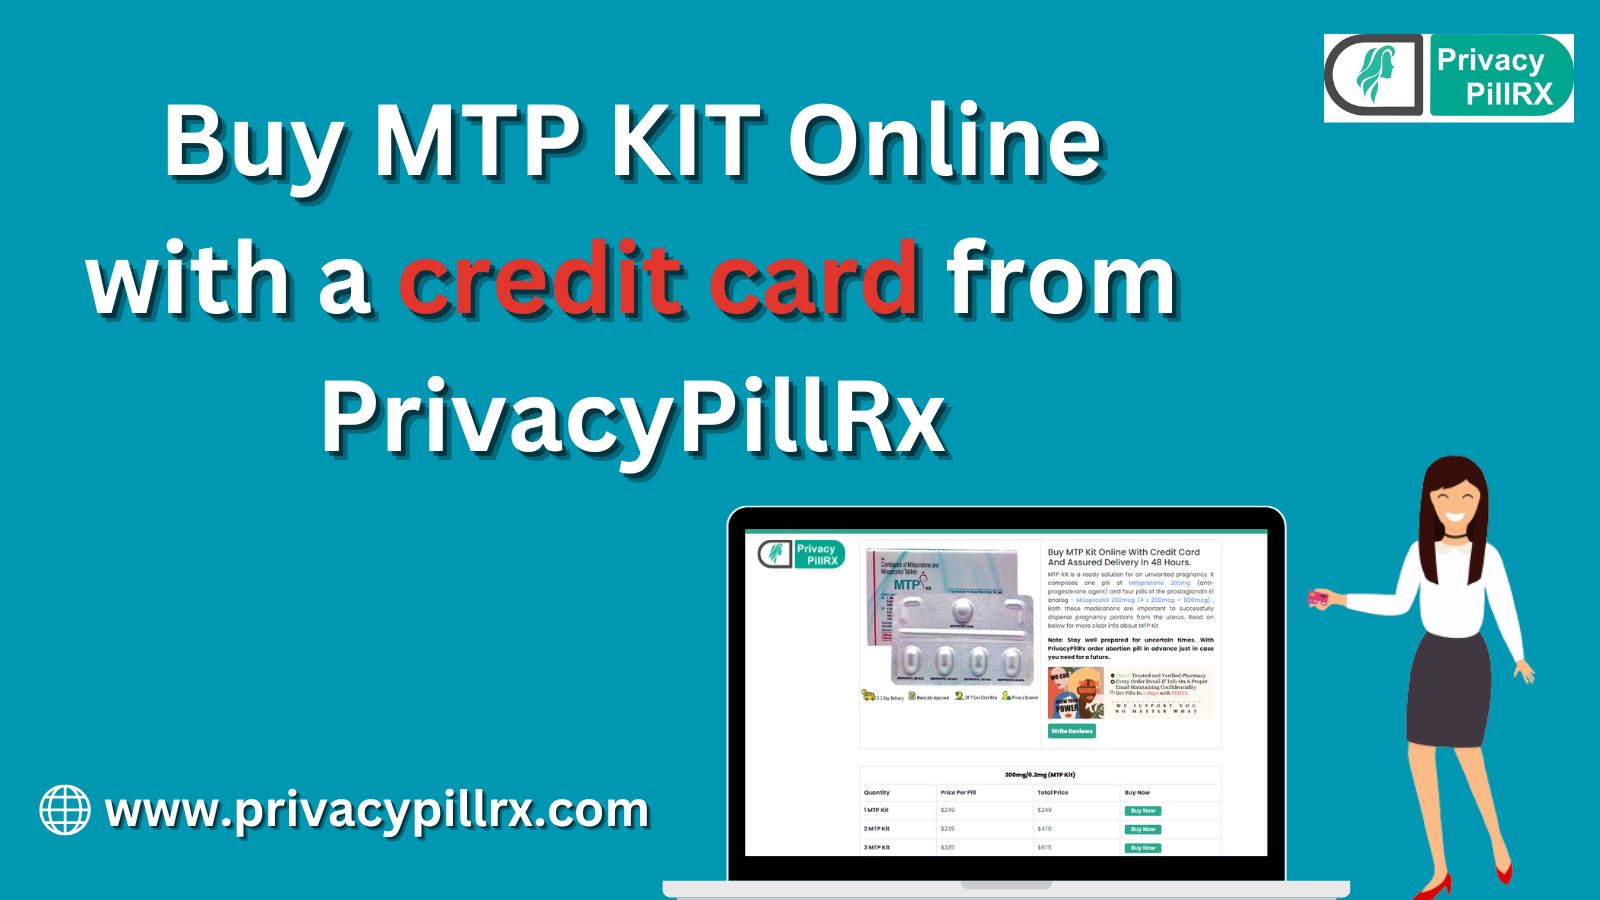 Buy MTP KIT Online with a credit card from PrivacyPillRx - photo